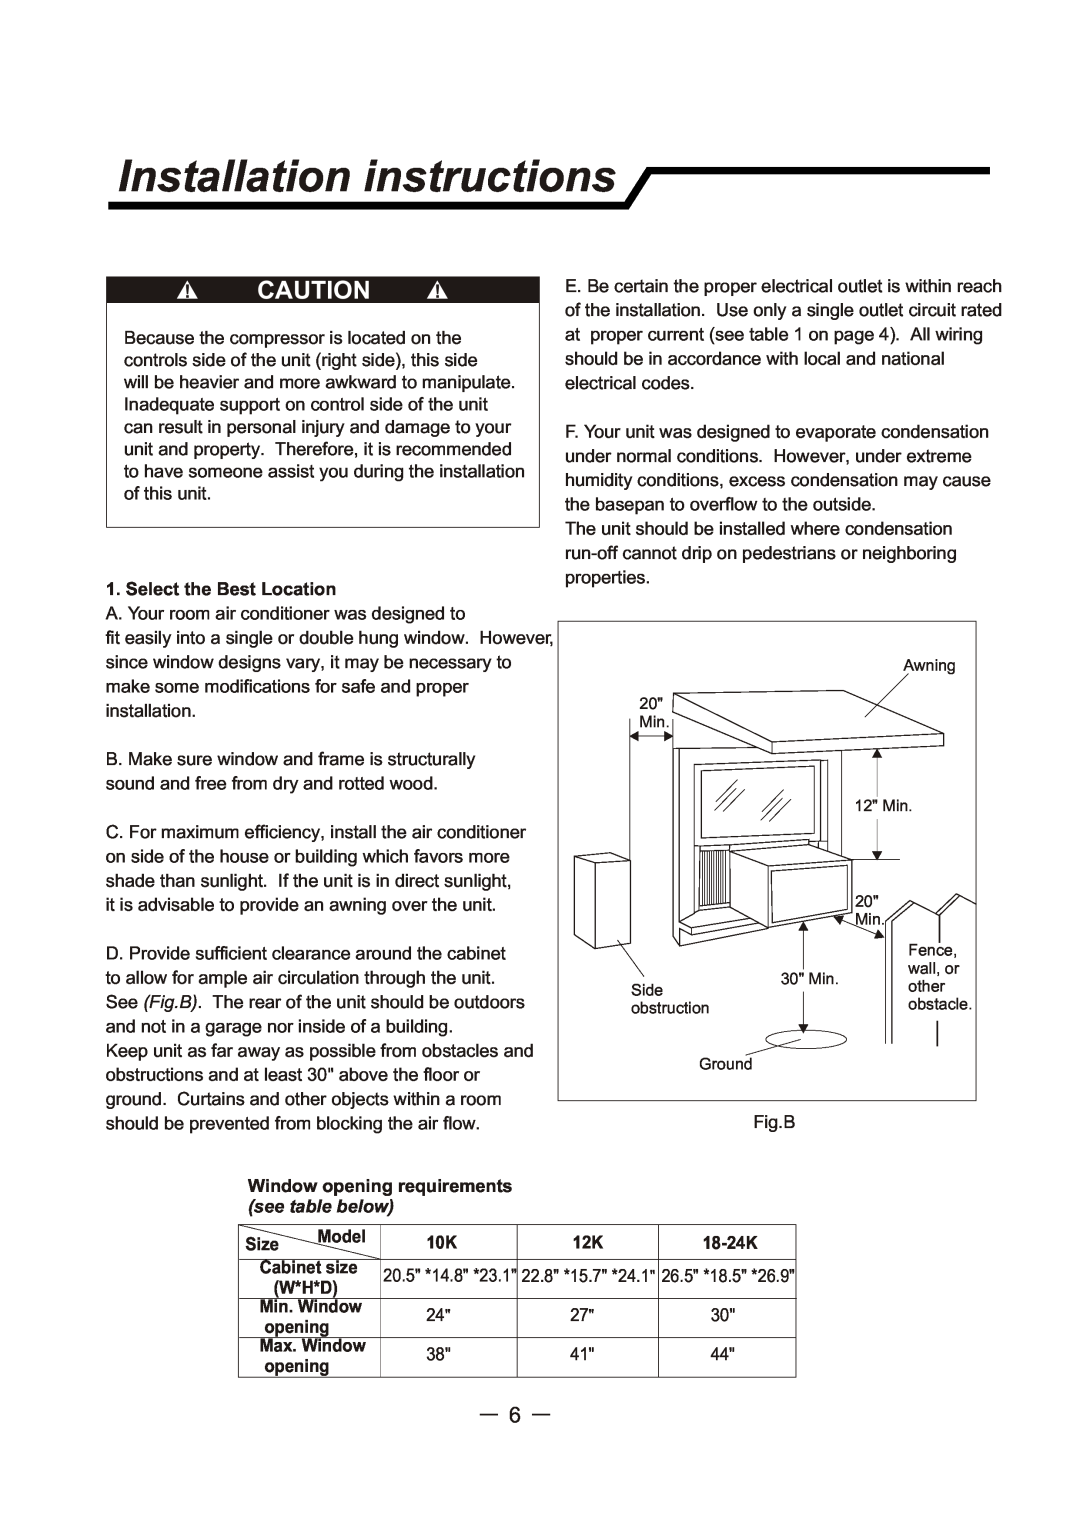 Sunbeam SCA103RWB1 Installation instructions, Select the Best Location, Window opening requirements, see table below, Size 